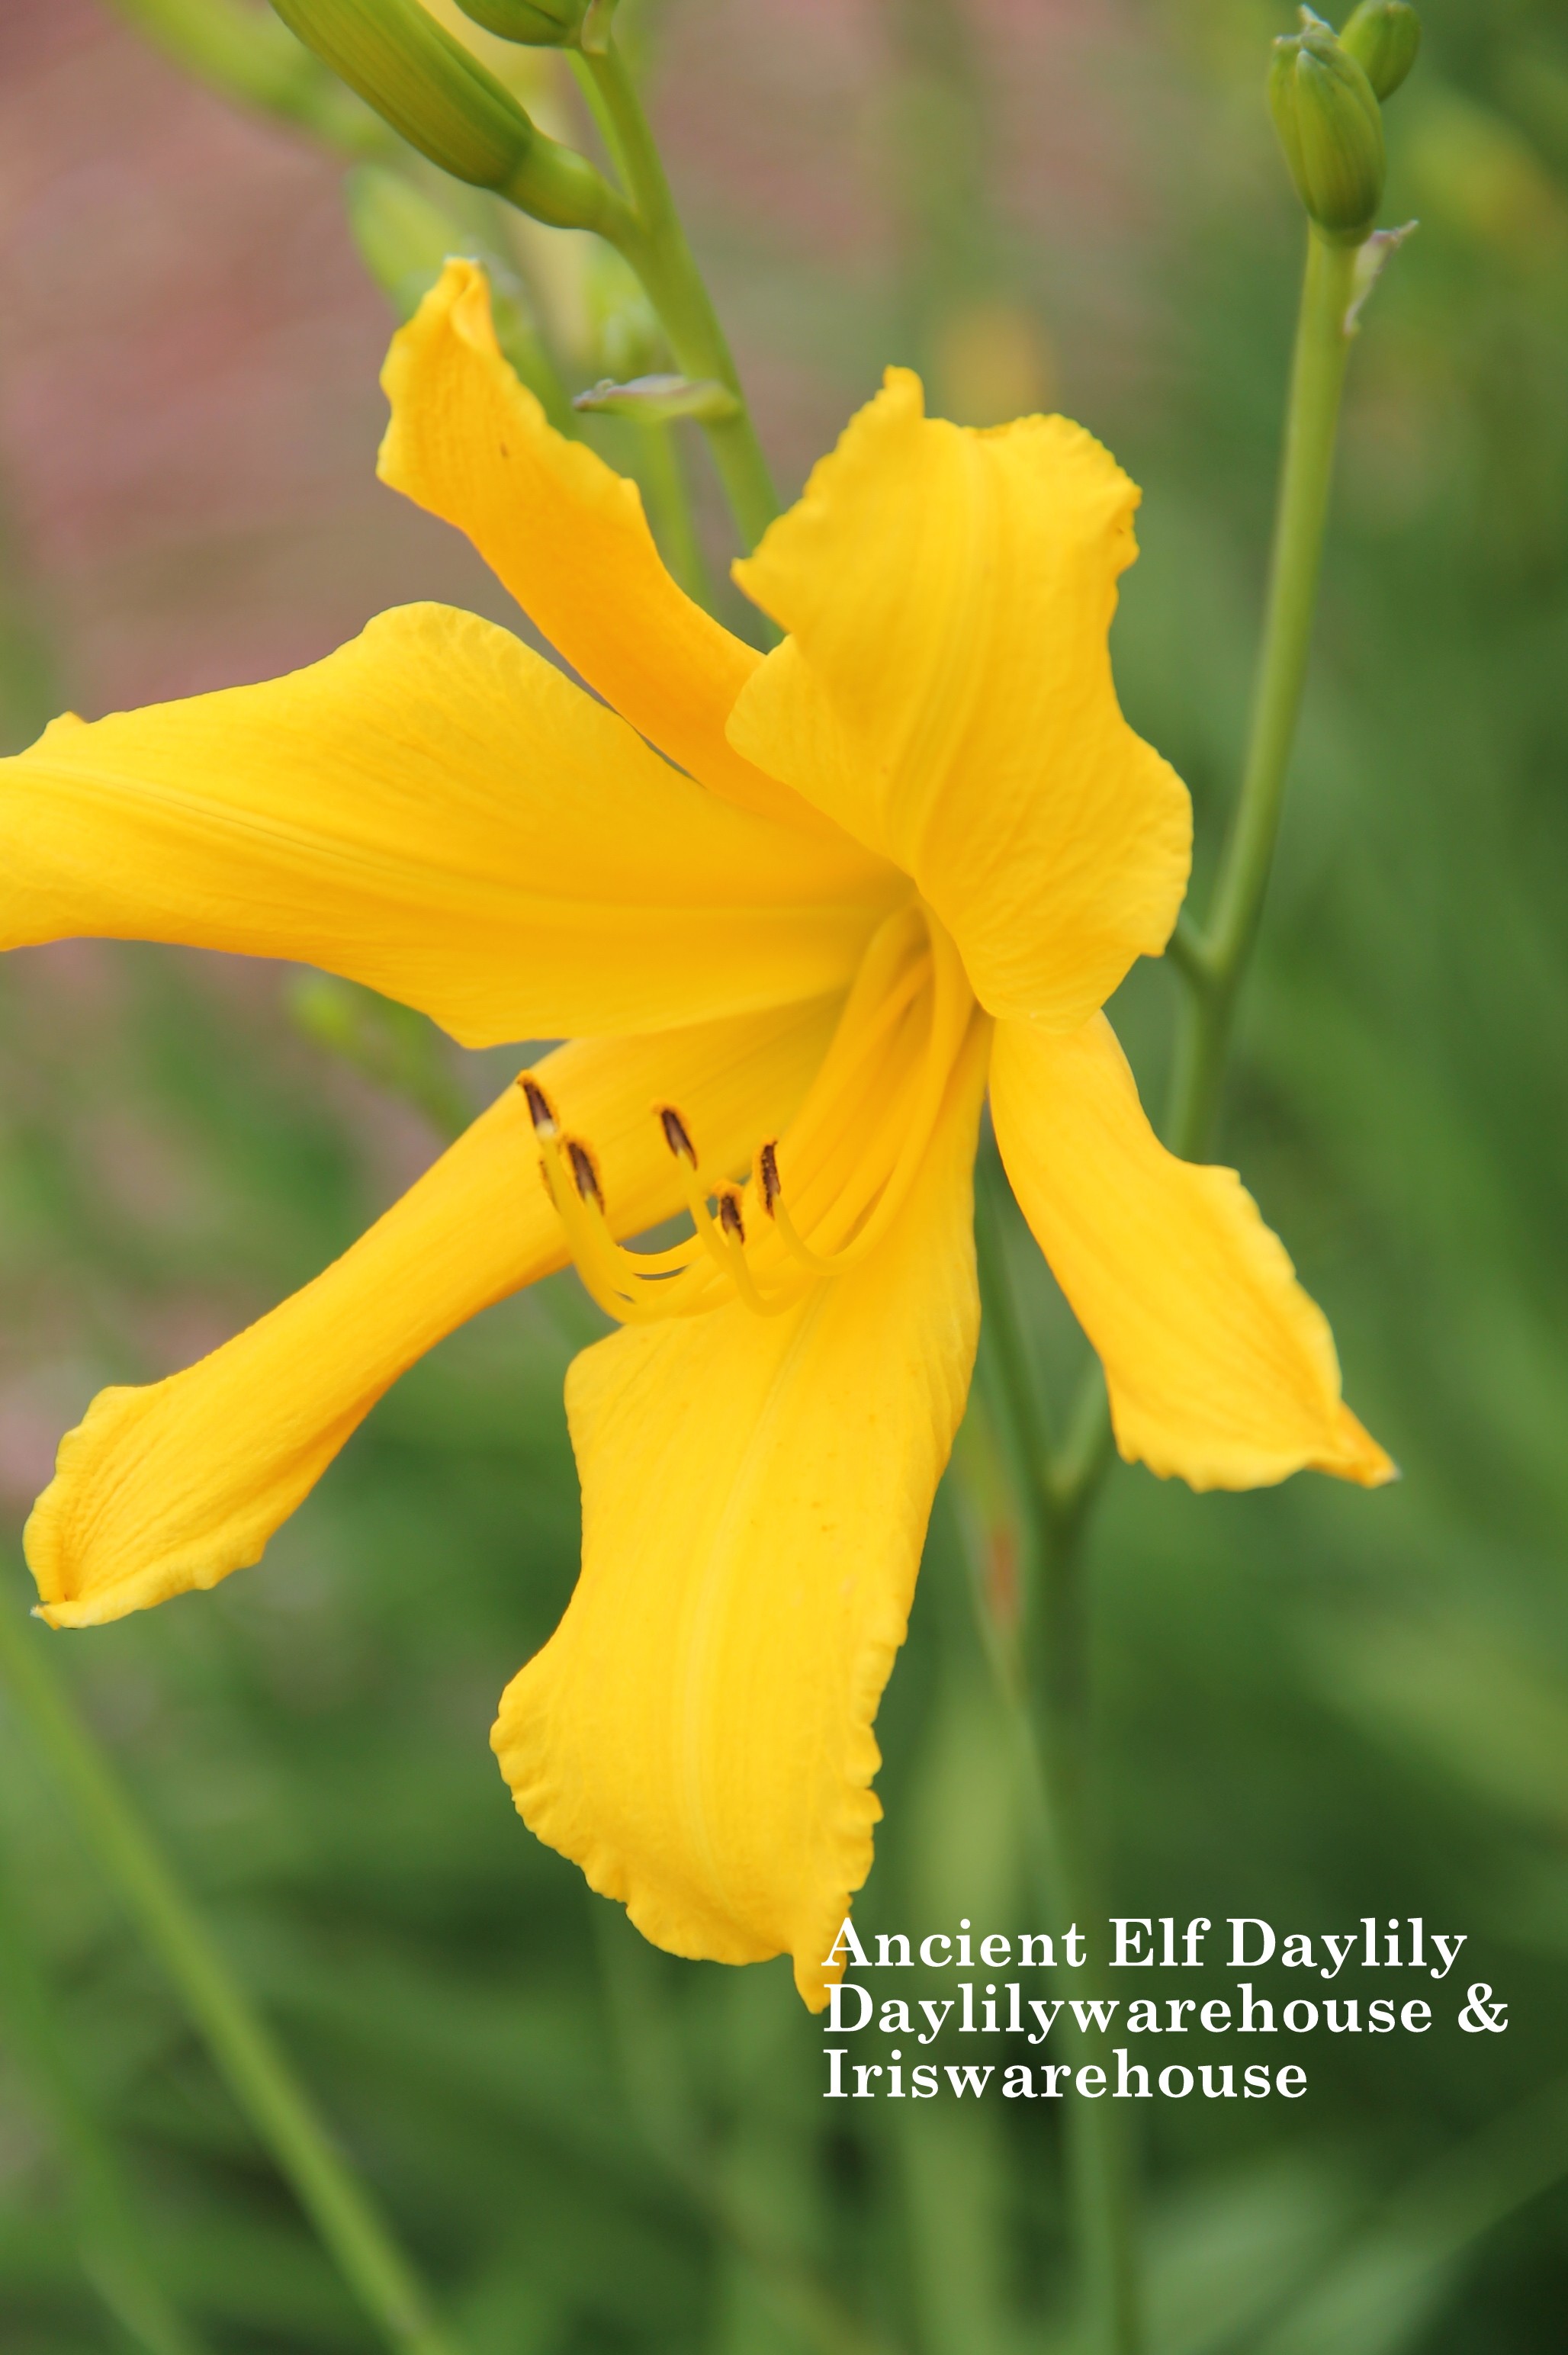 Ancient Elf Daylily